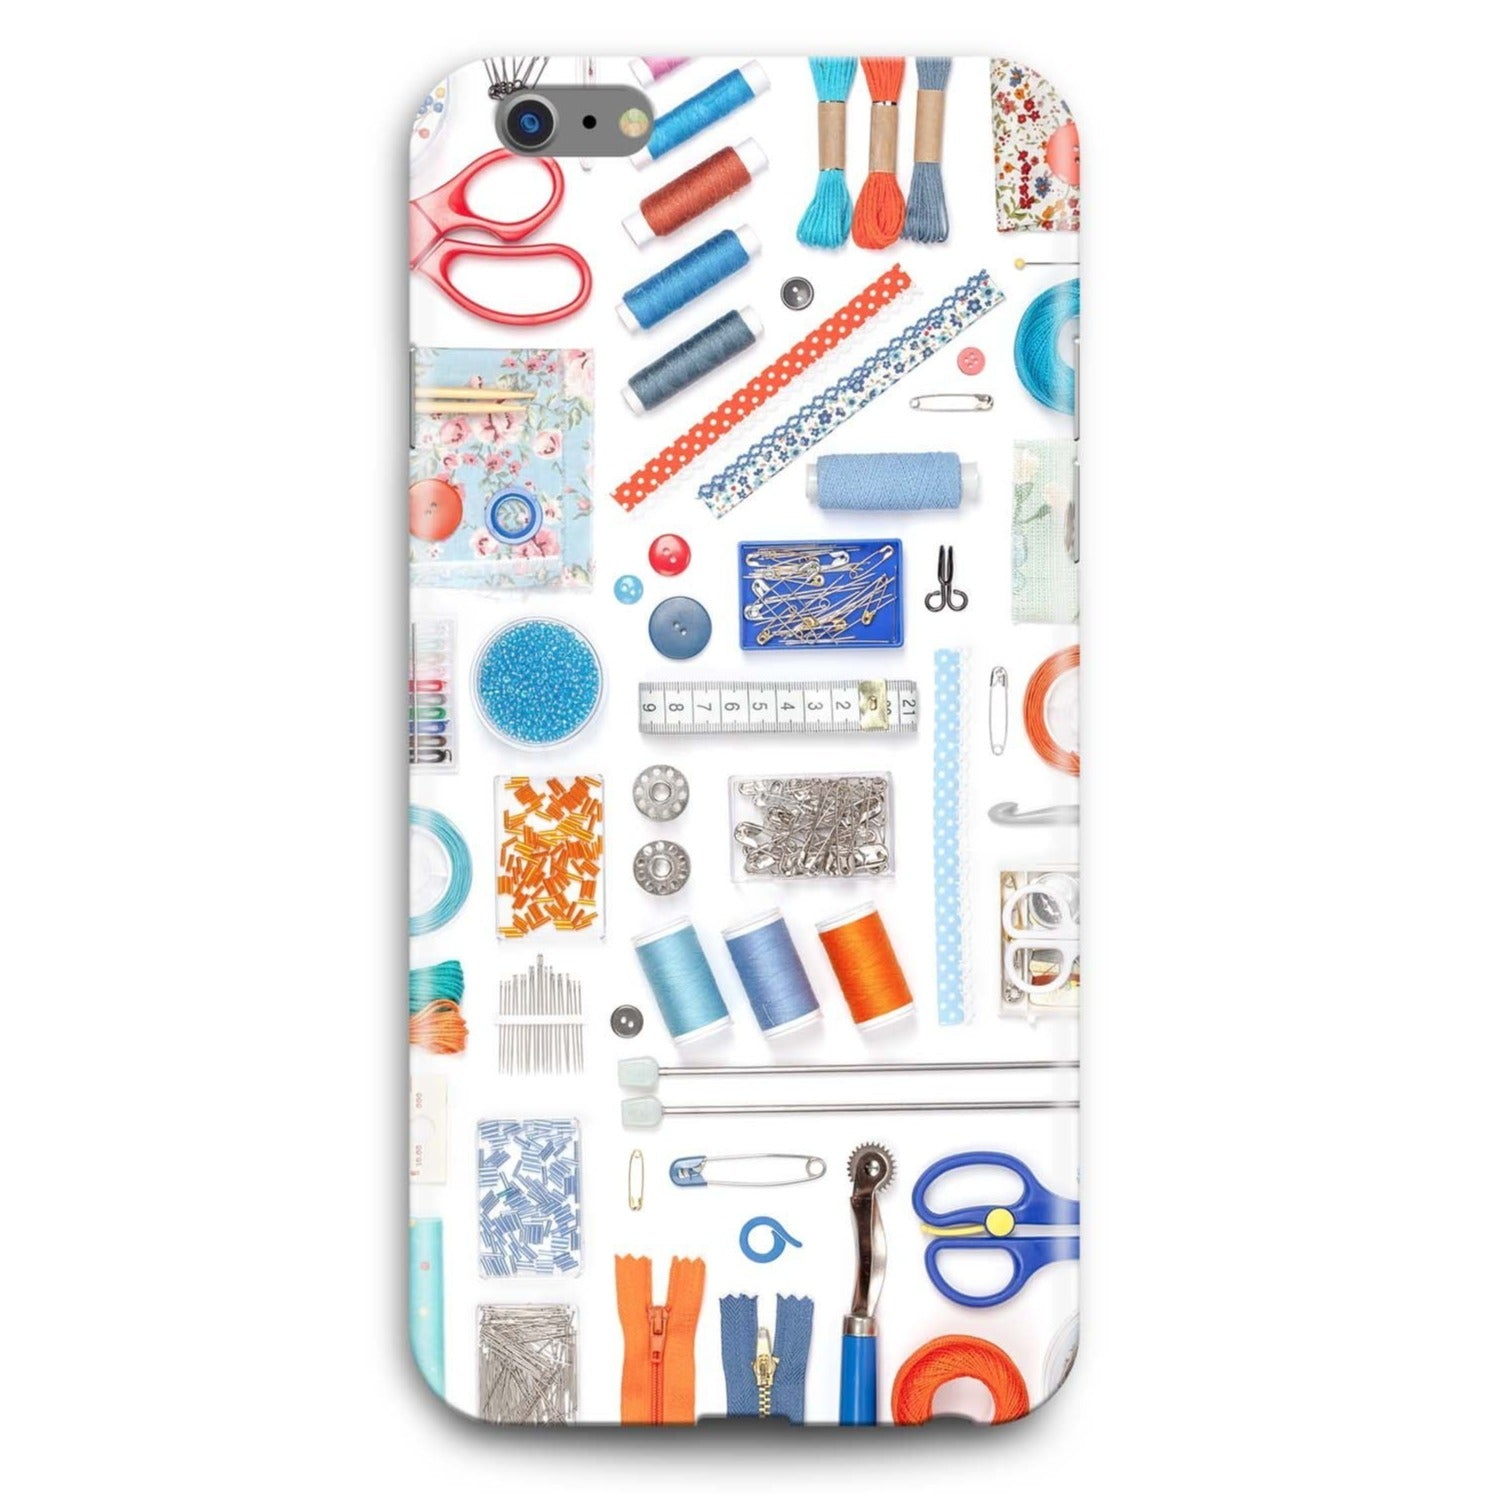 android phone cases